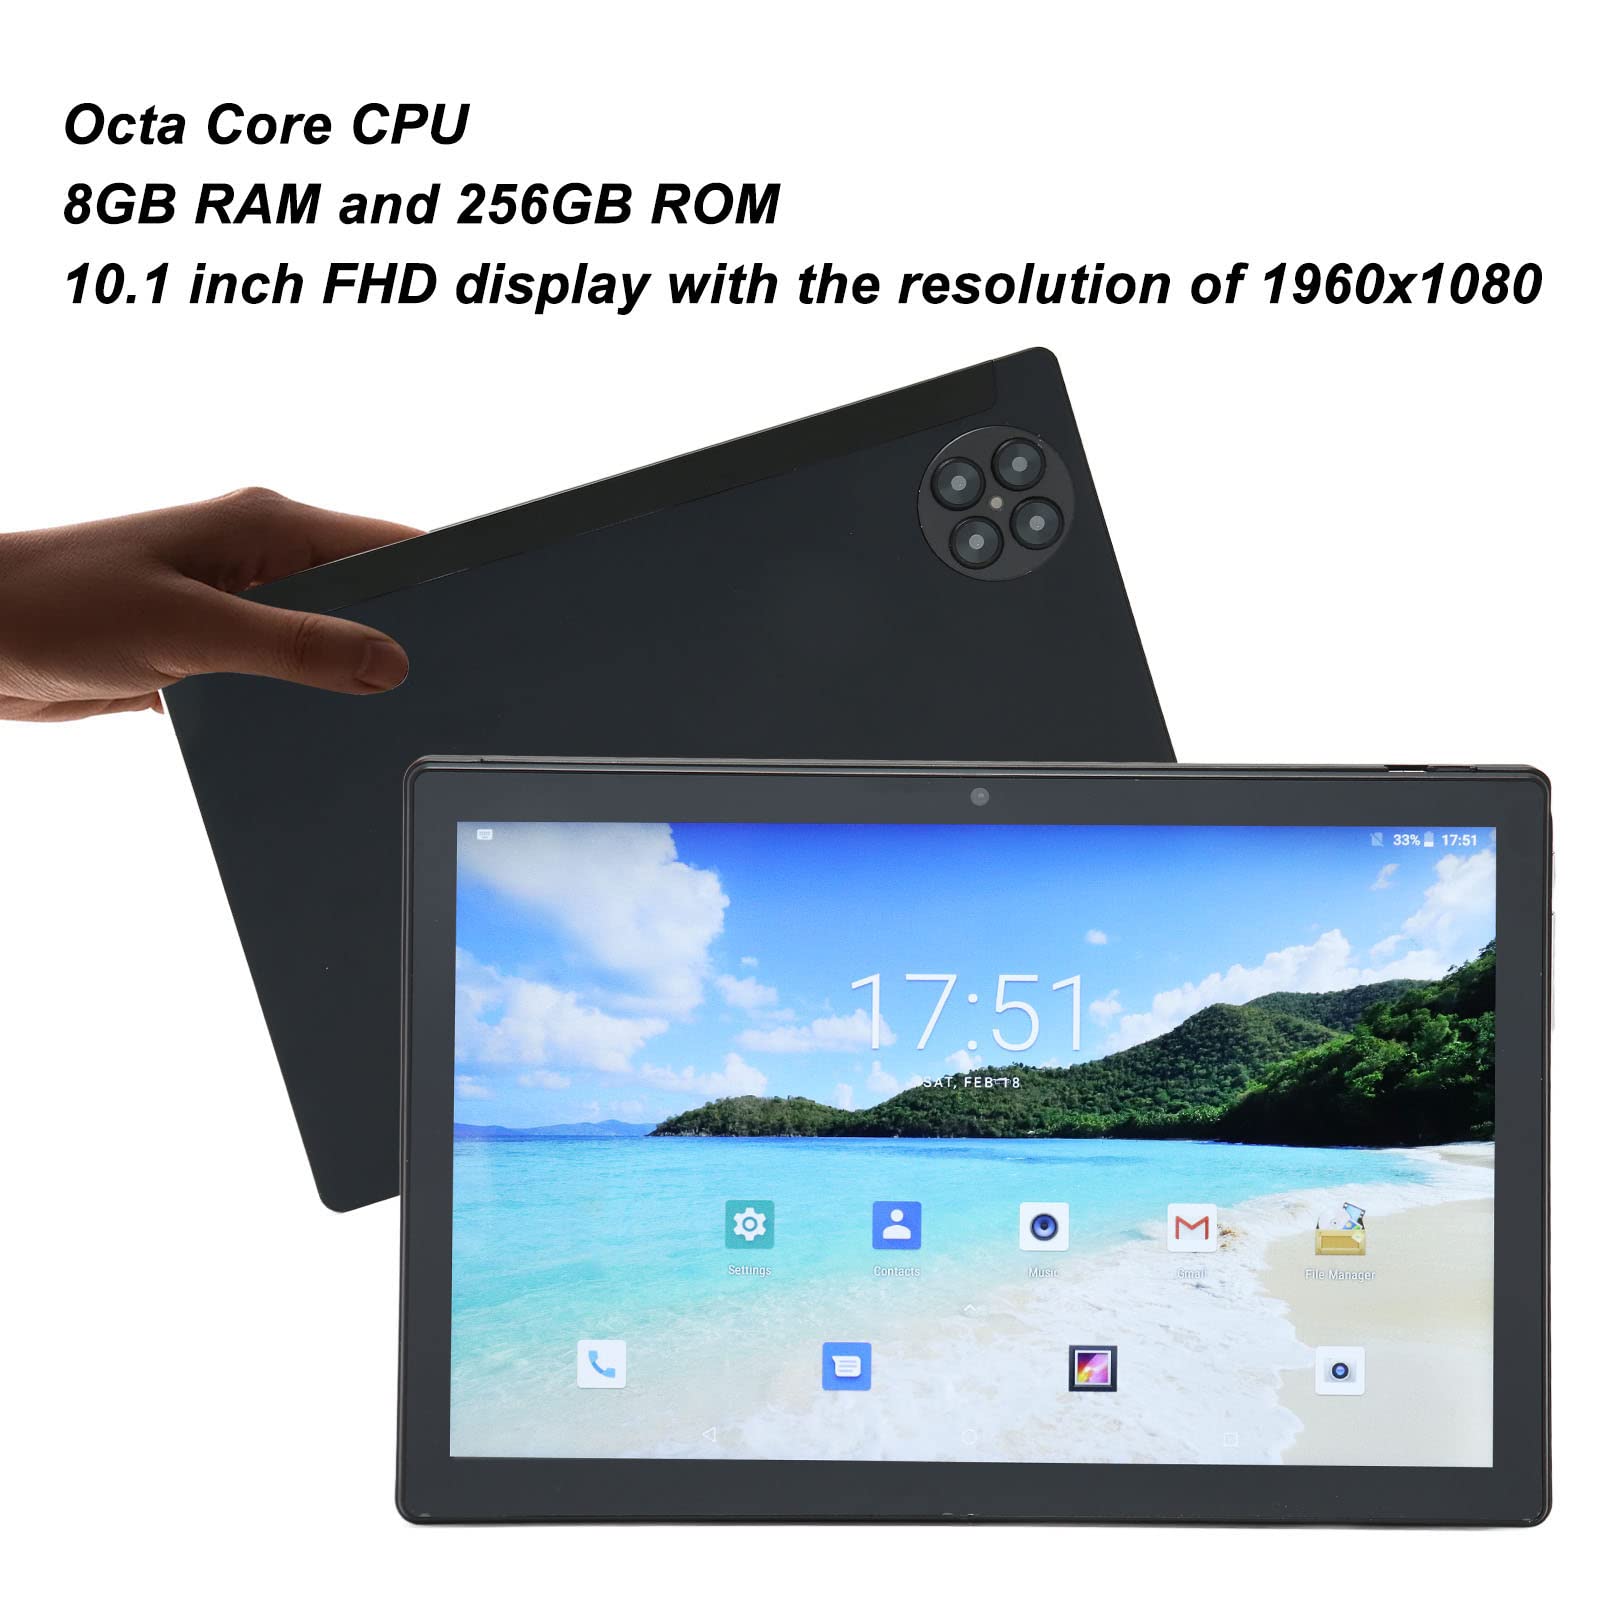 GOWENIC 10.1Inch Tablet for Android12, Octa Core CPU Latest Updated Tablets with 8GB RAM 256GB ROM, 4G LTE Gaming Tablet for Office Travel, Maximum 128GB Memory Card Expandable (US)